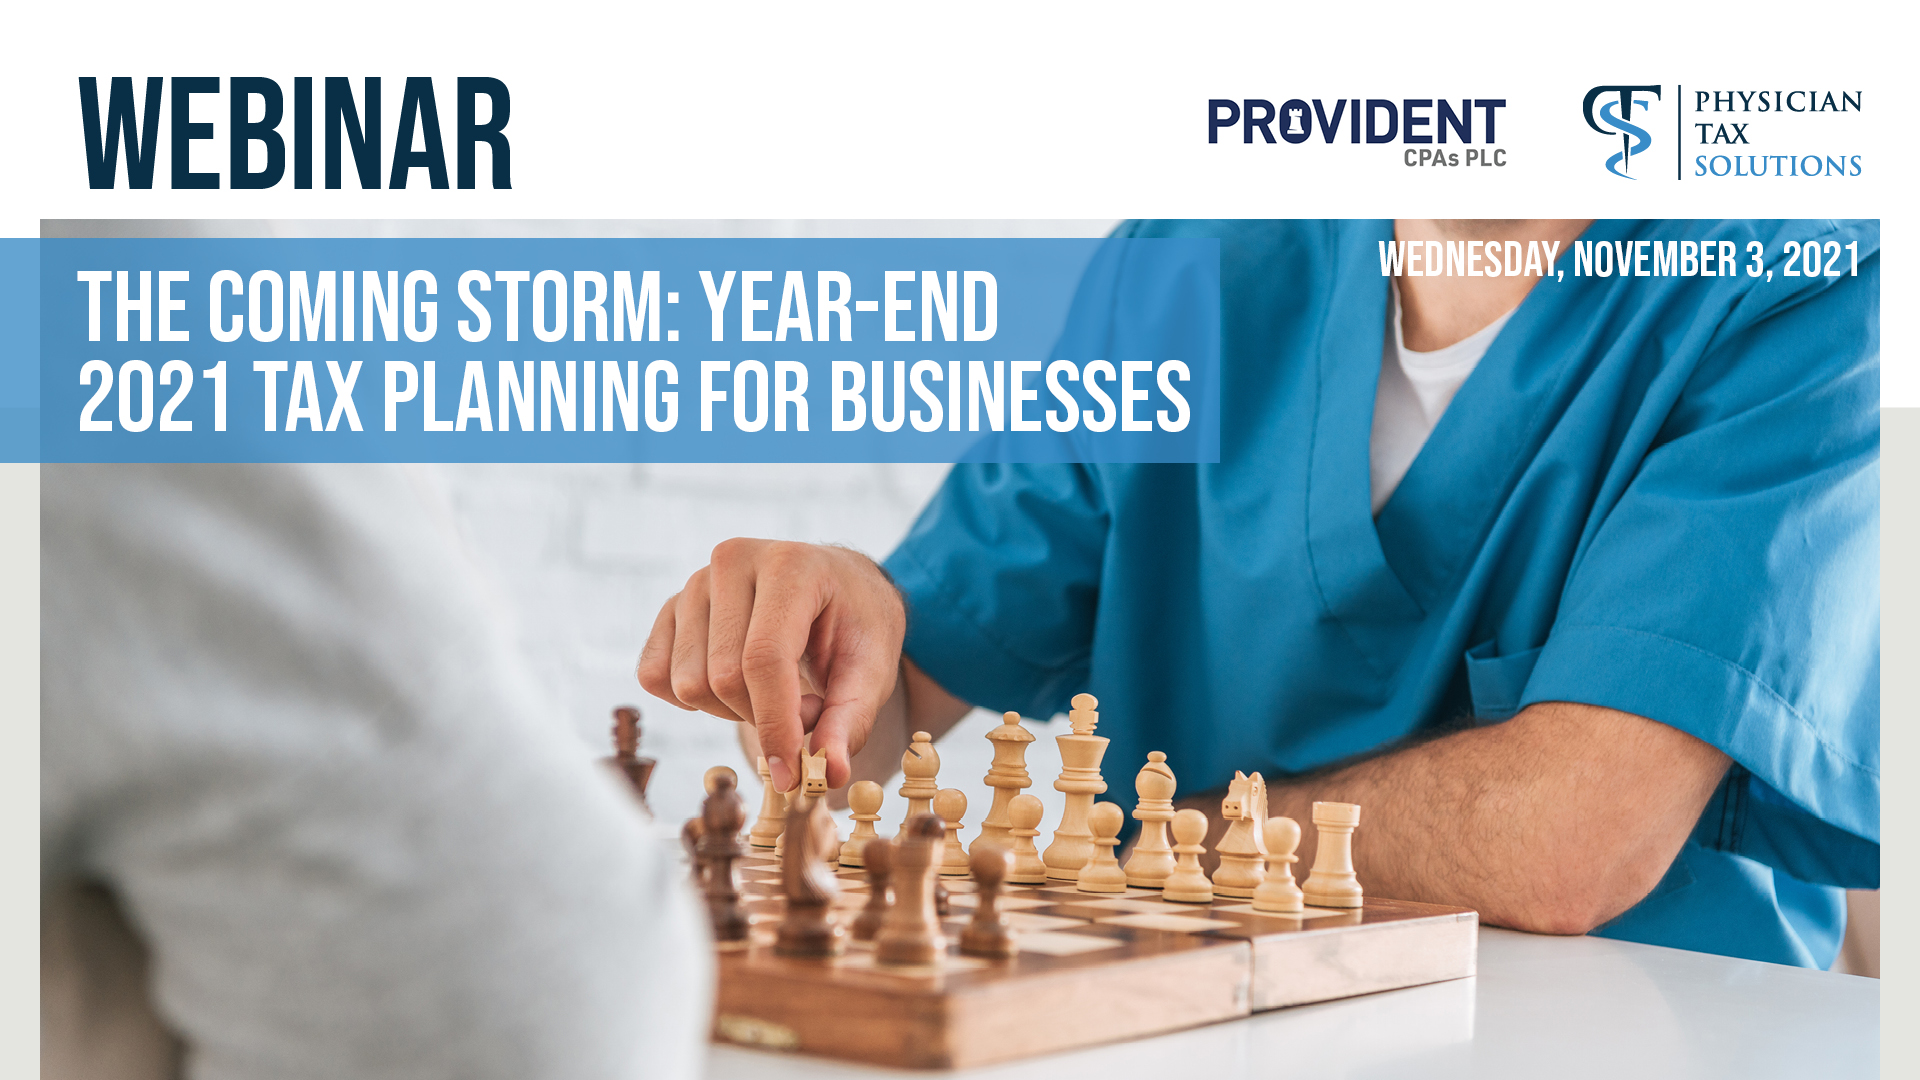 The Coming Storm: Year-End Tax Planning for Businesses